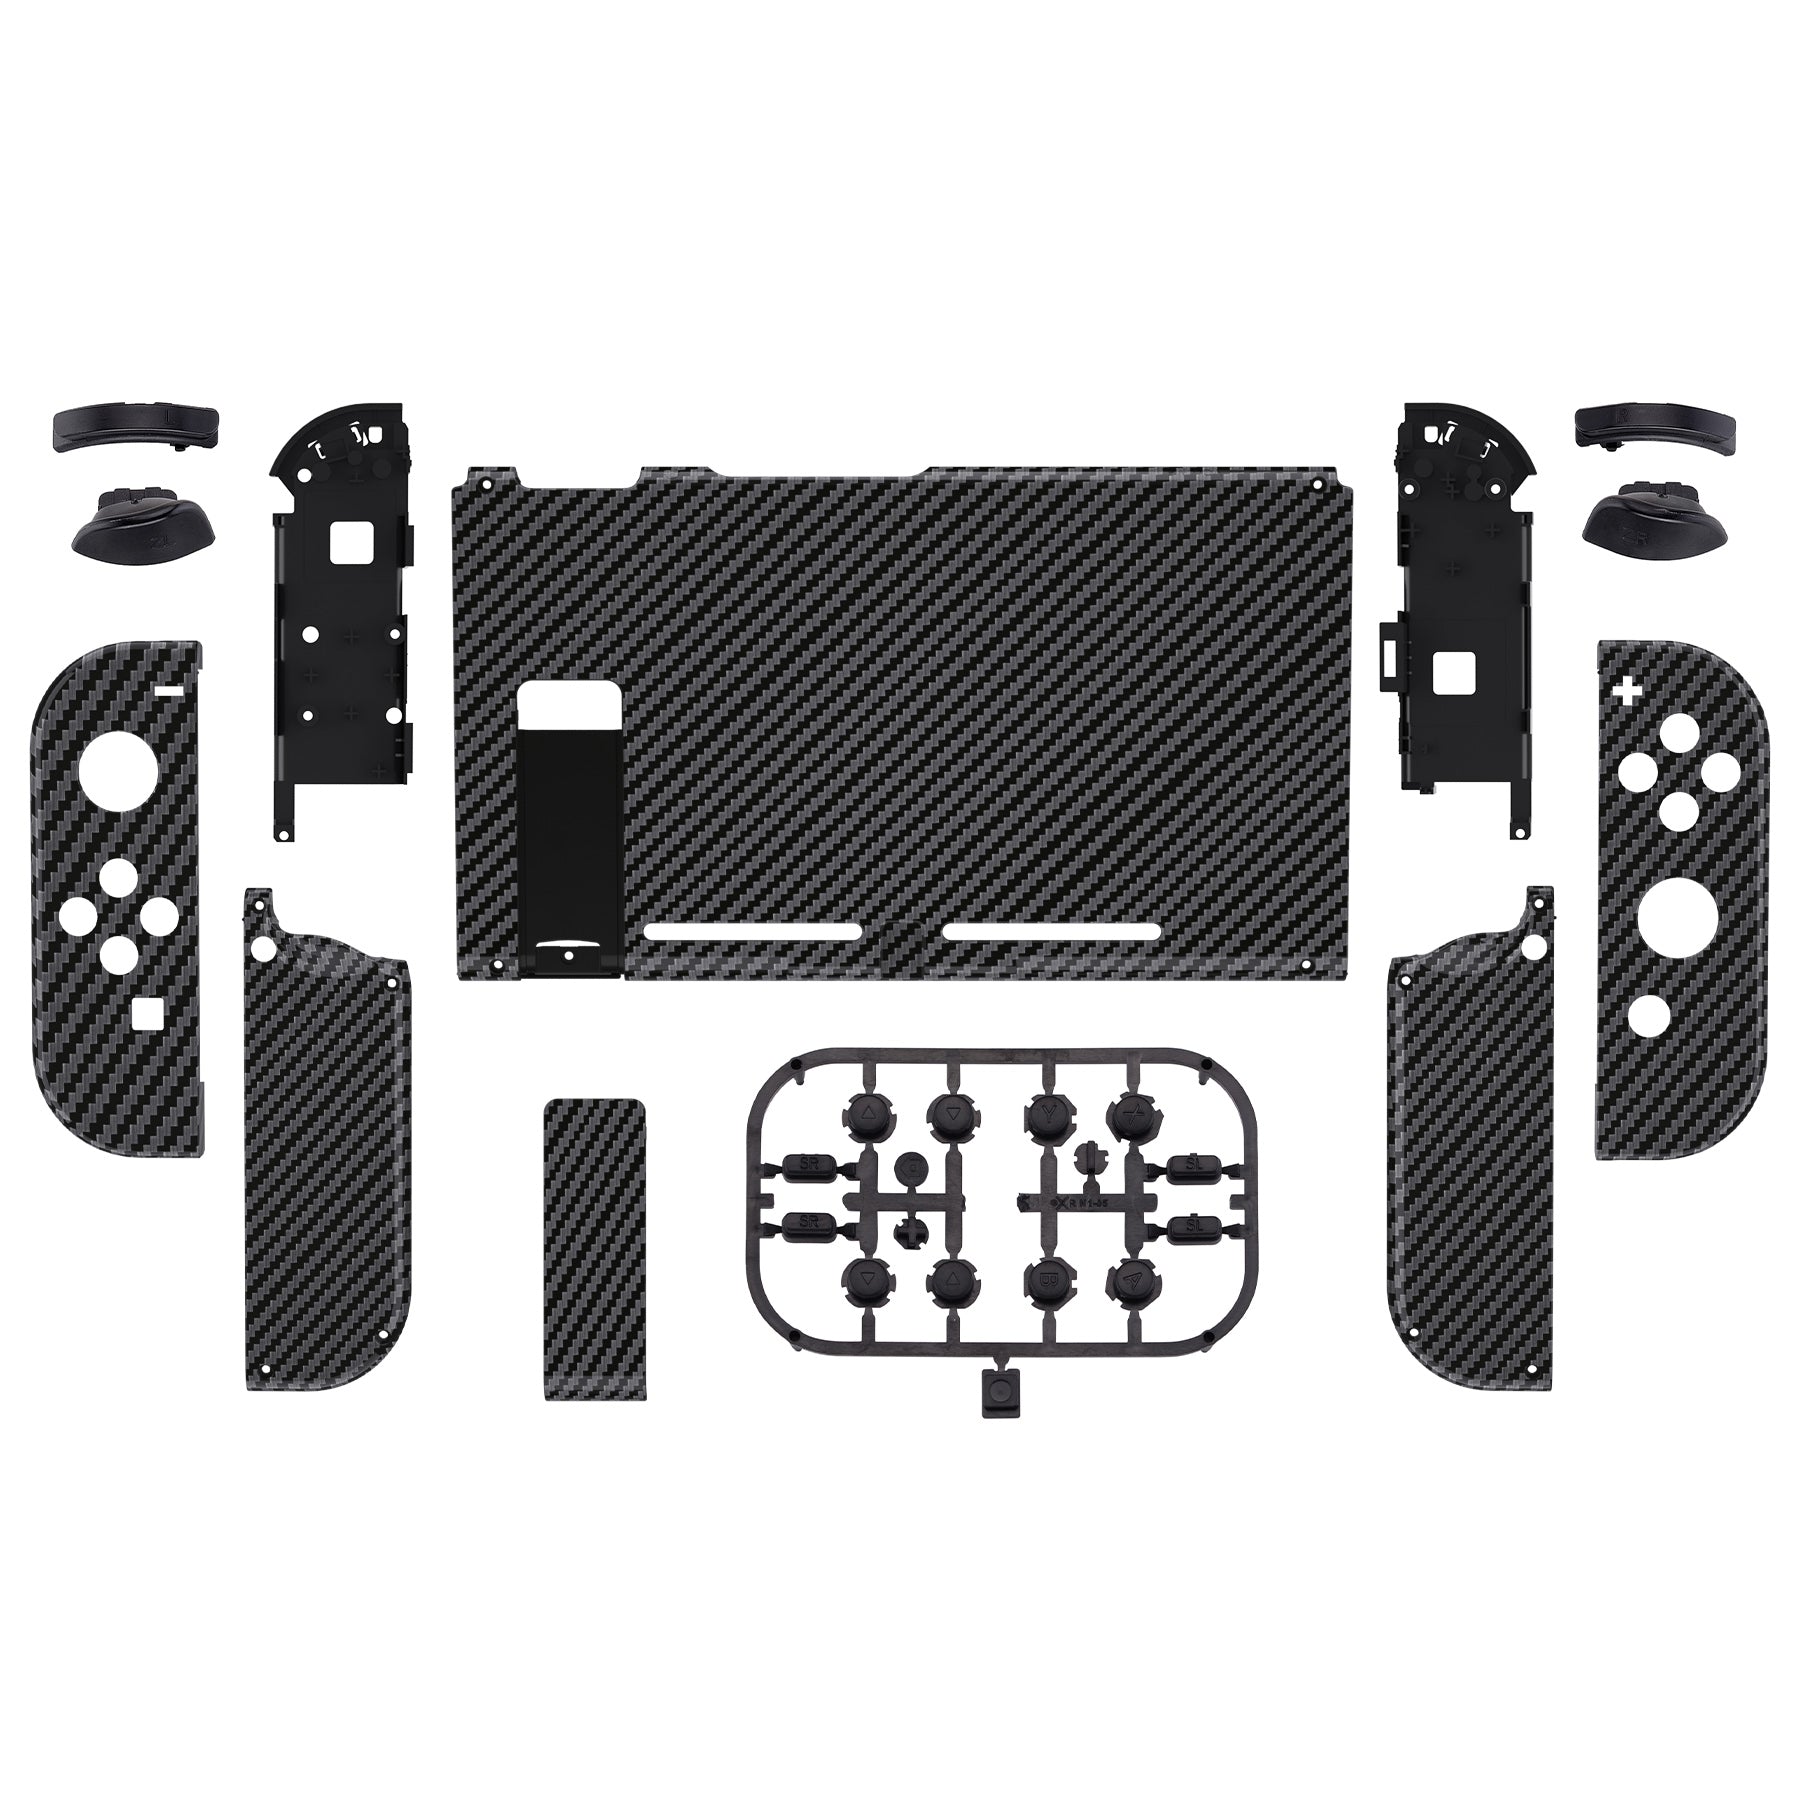 eXtremeRate Retail Soft Touch Grip Graphite Carbon Fiber Patterned Back Plate for Nintendo Switch Console, NS Joycon Handheld Controller Housing with Full Set Buttons, DIY Replacement Shell for Nintendo Switch- QS207